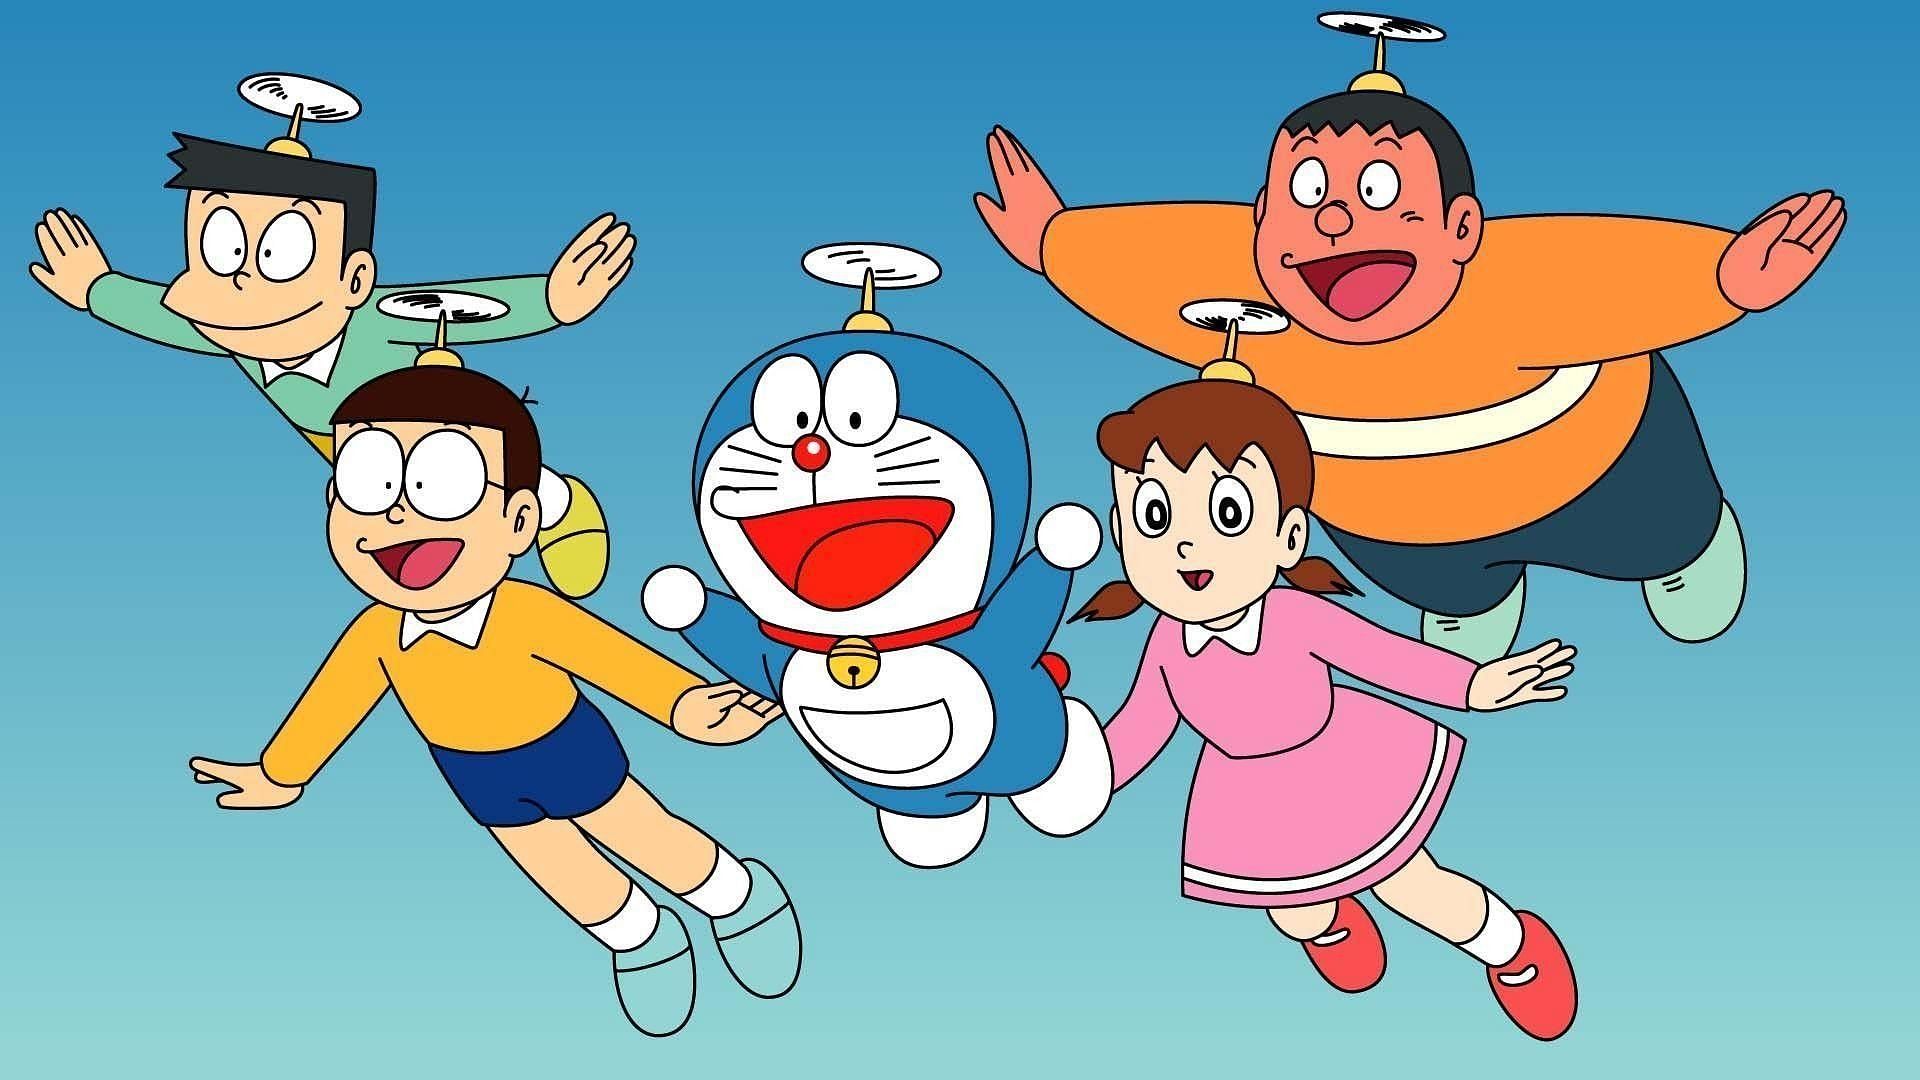 Doraemon to get Attack on Titan and Spy X Family crossover